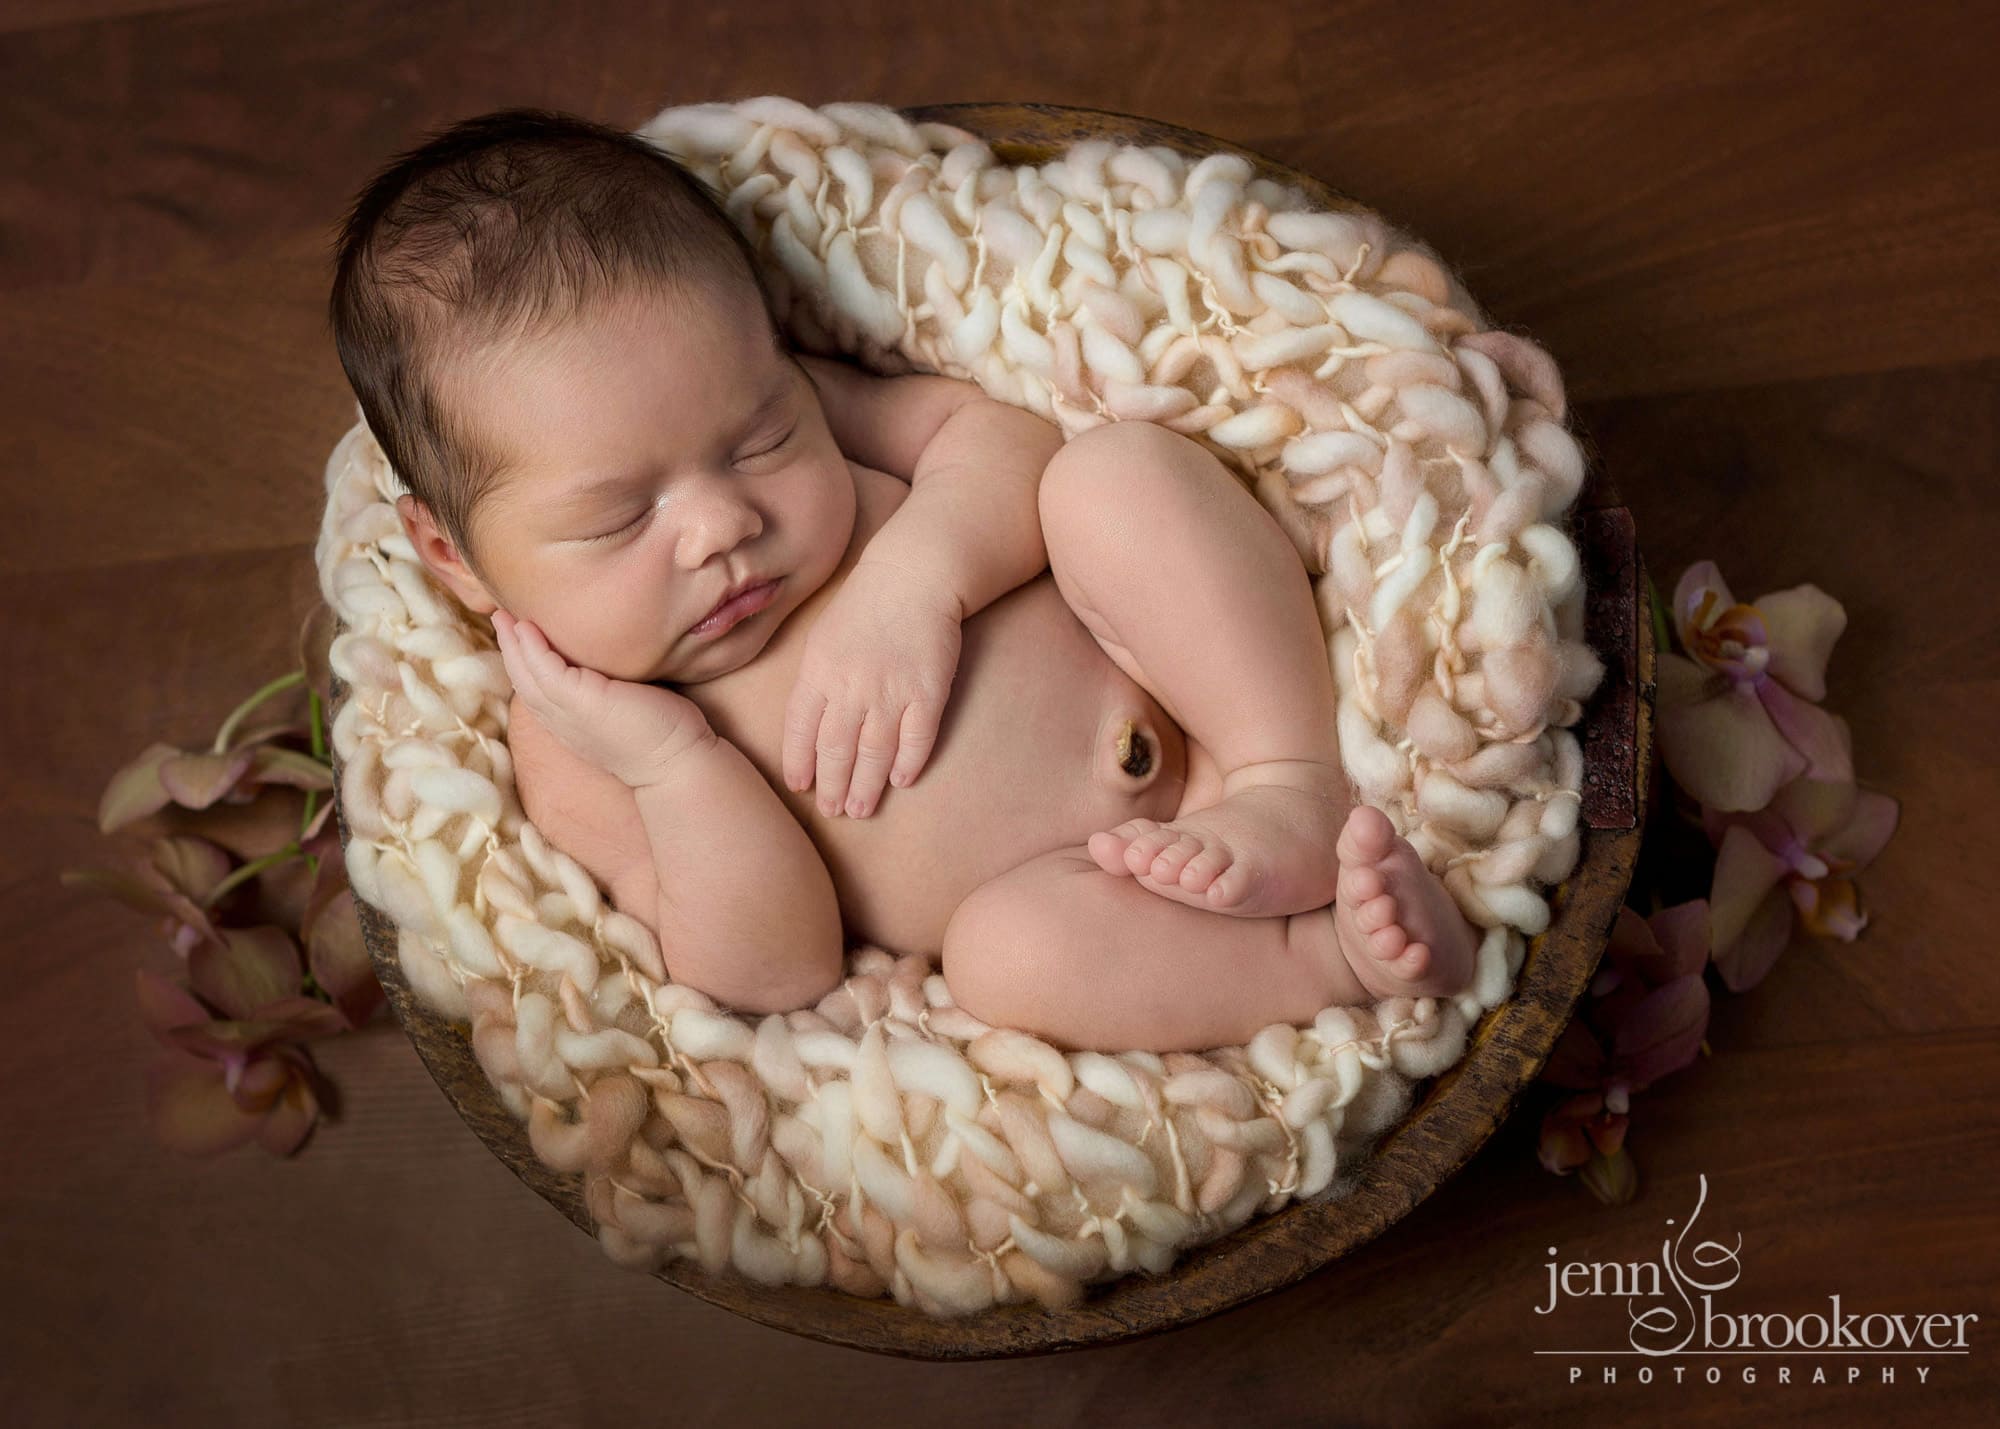 newborn in peach with flowers cuddled up for her newborn portrait session with Jenn Brookover in San Antonio